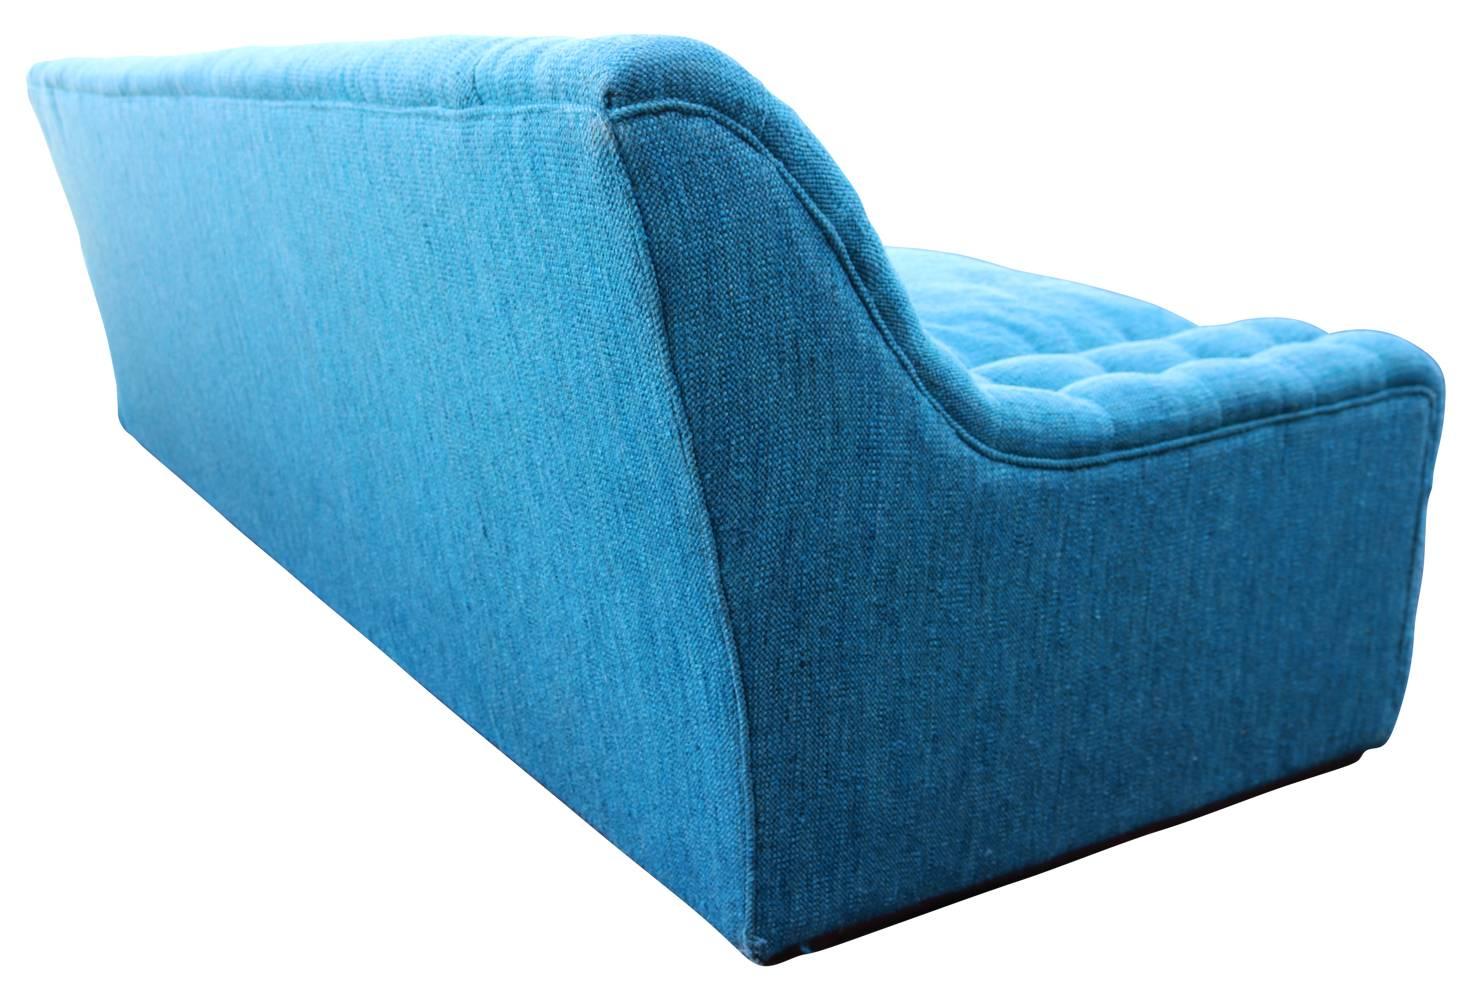 20th Century Blue Plinth Based Sofa with Tufted Arms